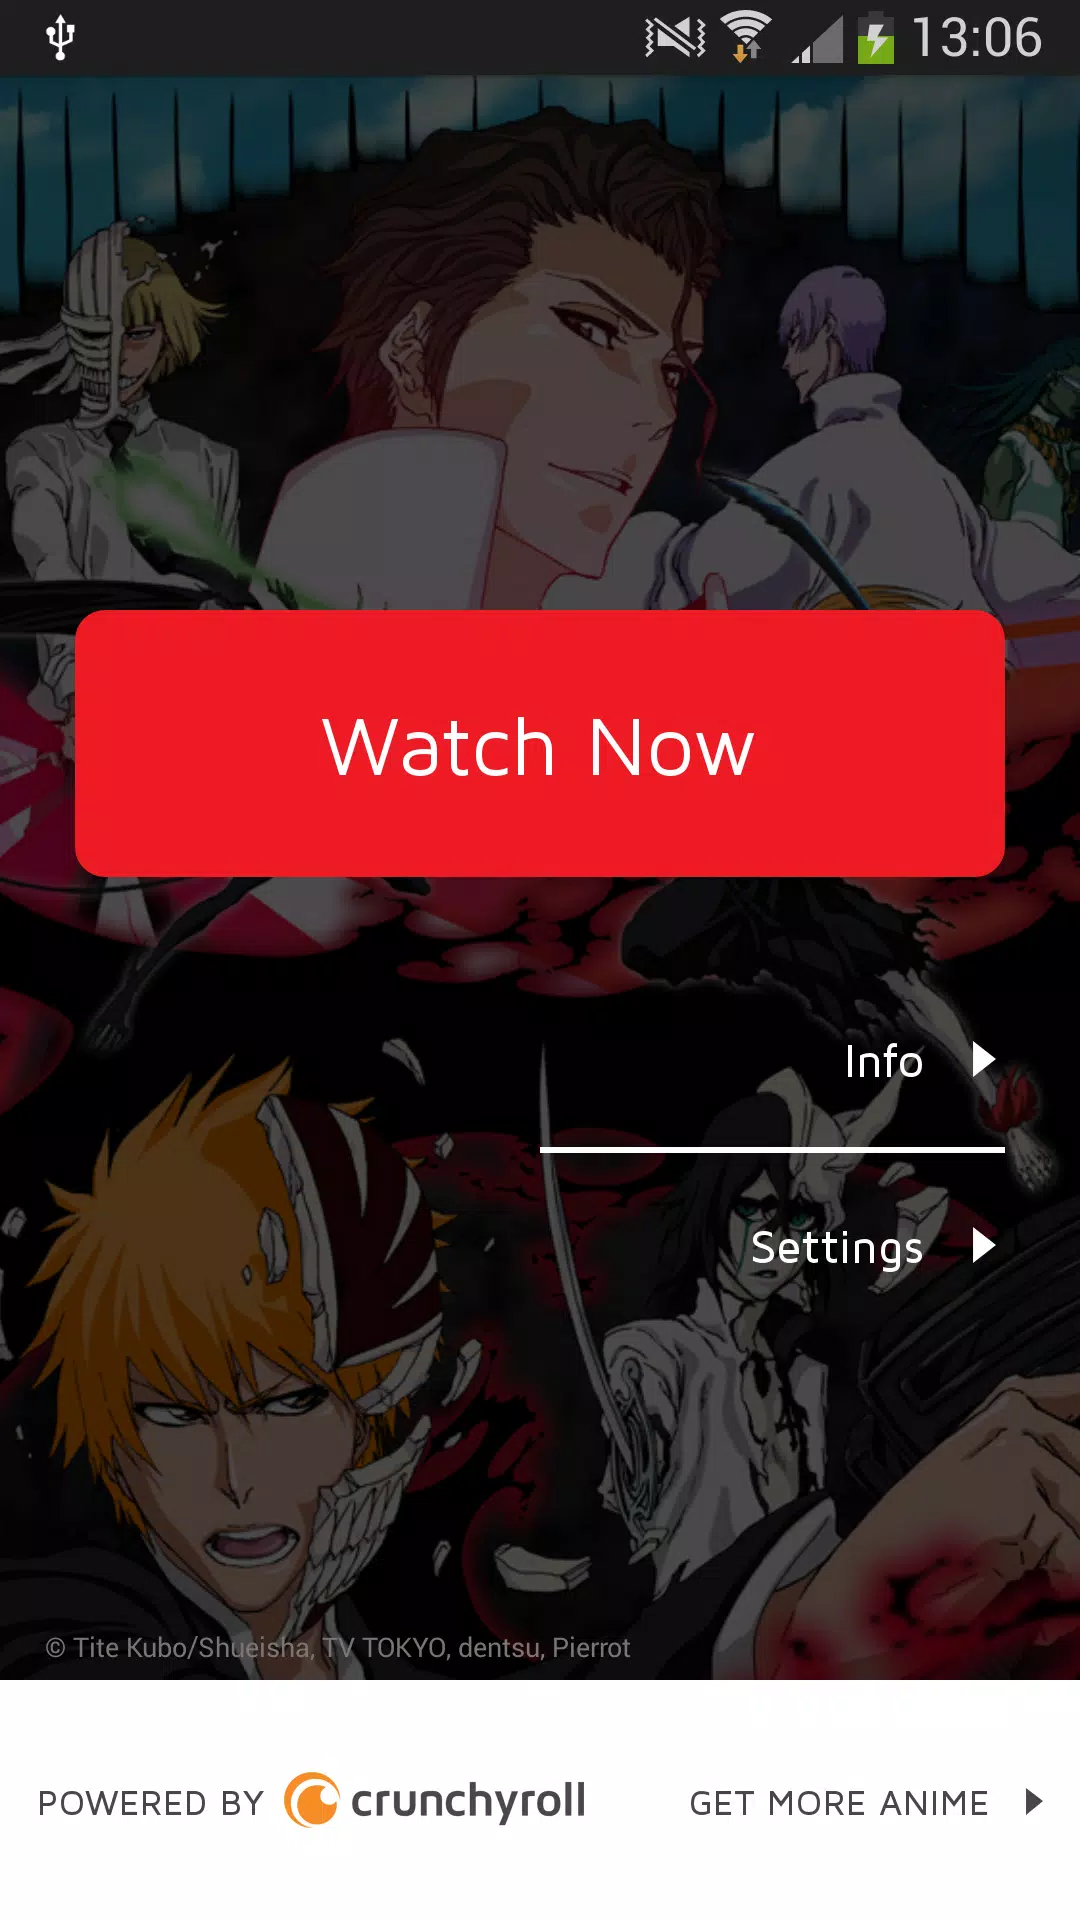 Where can I watch Bleach now that it's not on Crunchyroll and